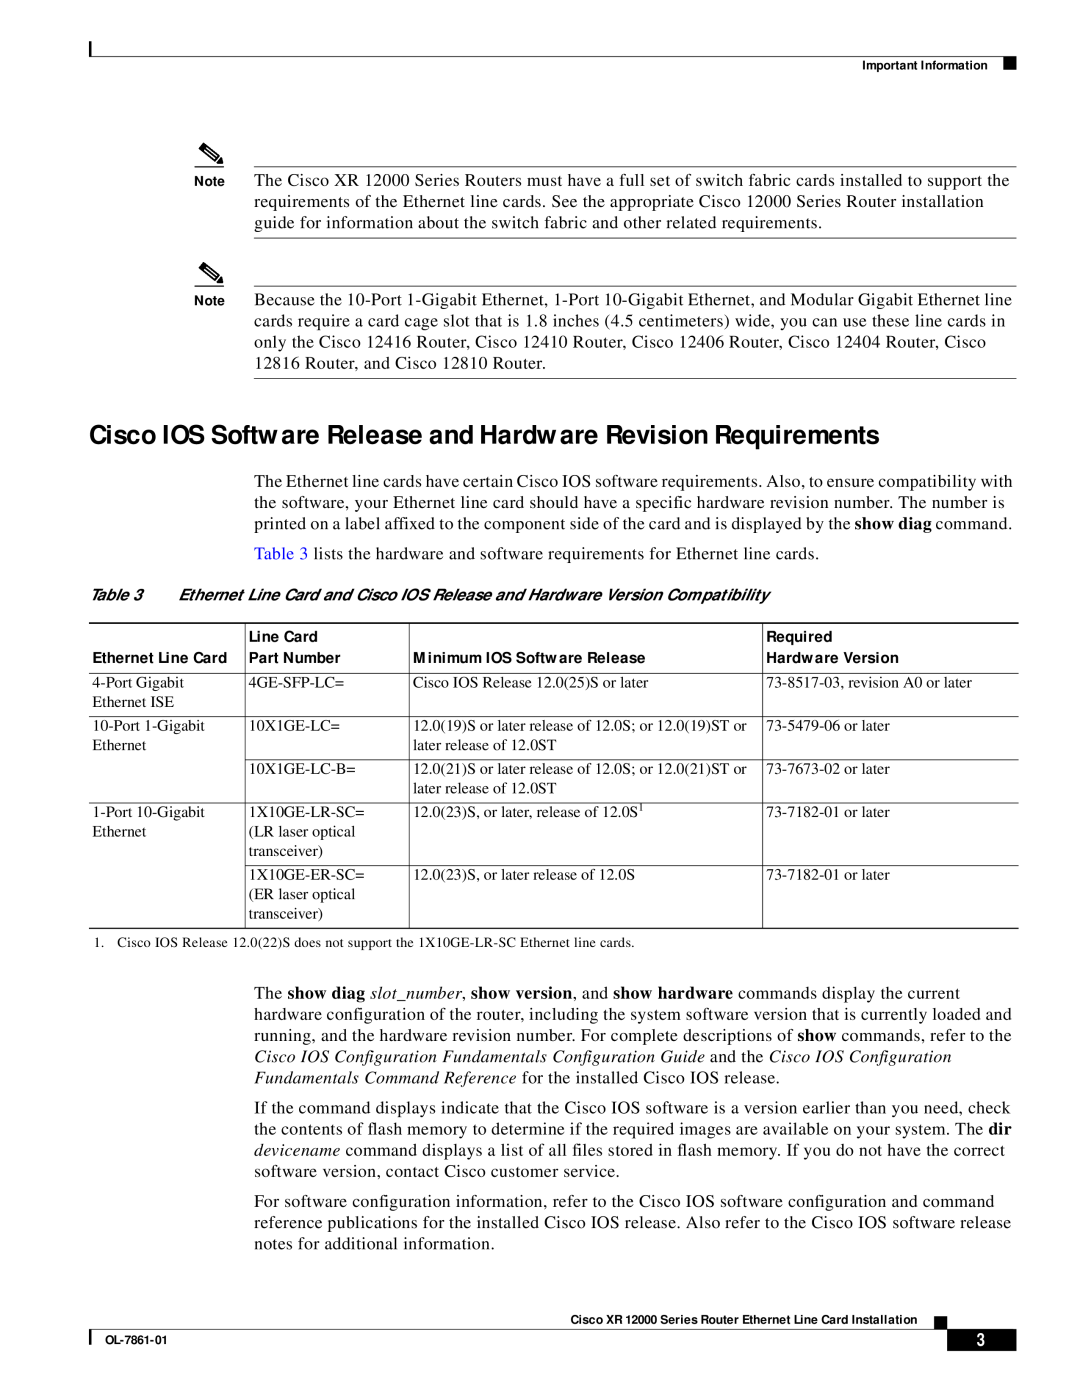 Cisco Systems OL-7861-01 Cisco IOS Software Release and Hardware Revision Requirements, Line Card, Required, Part Number 